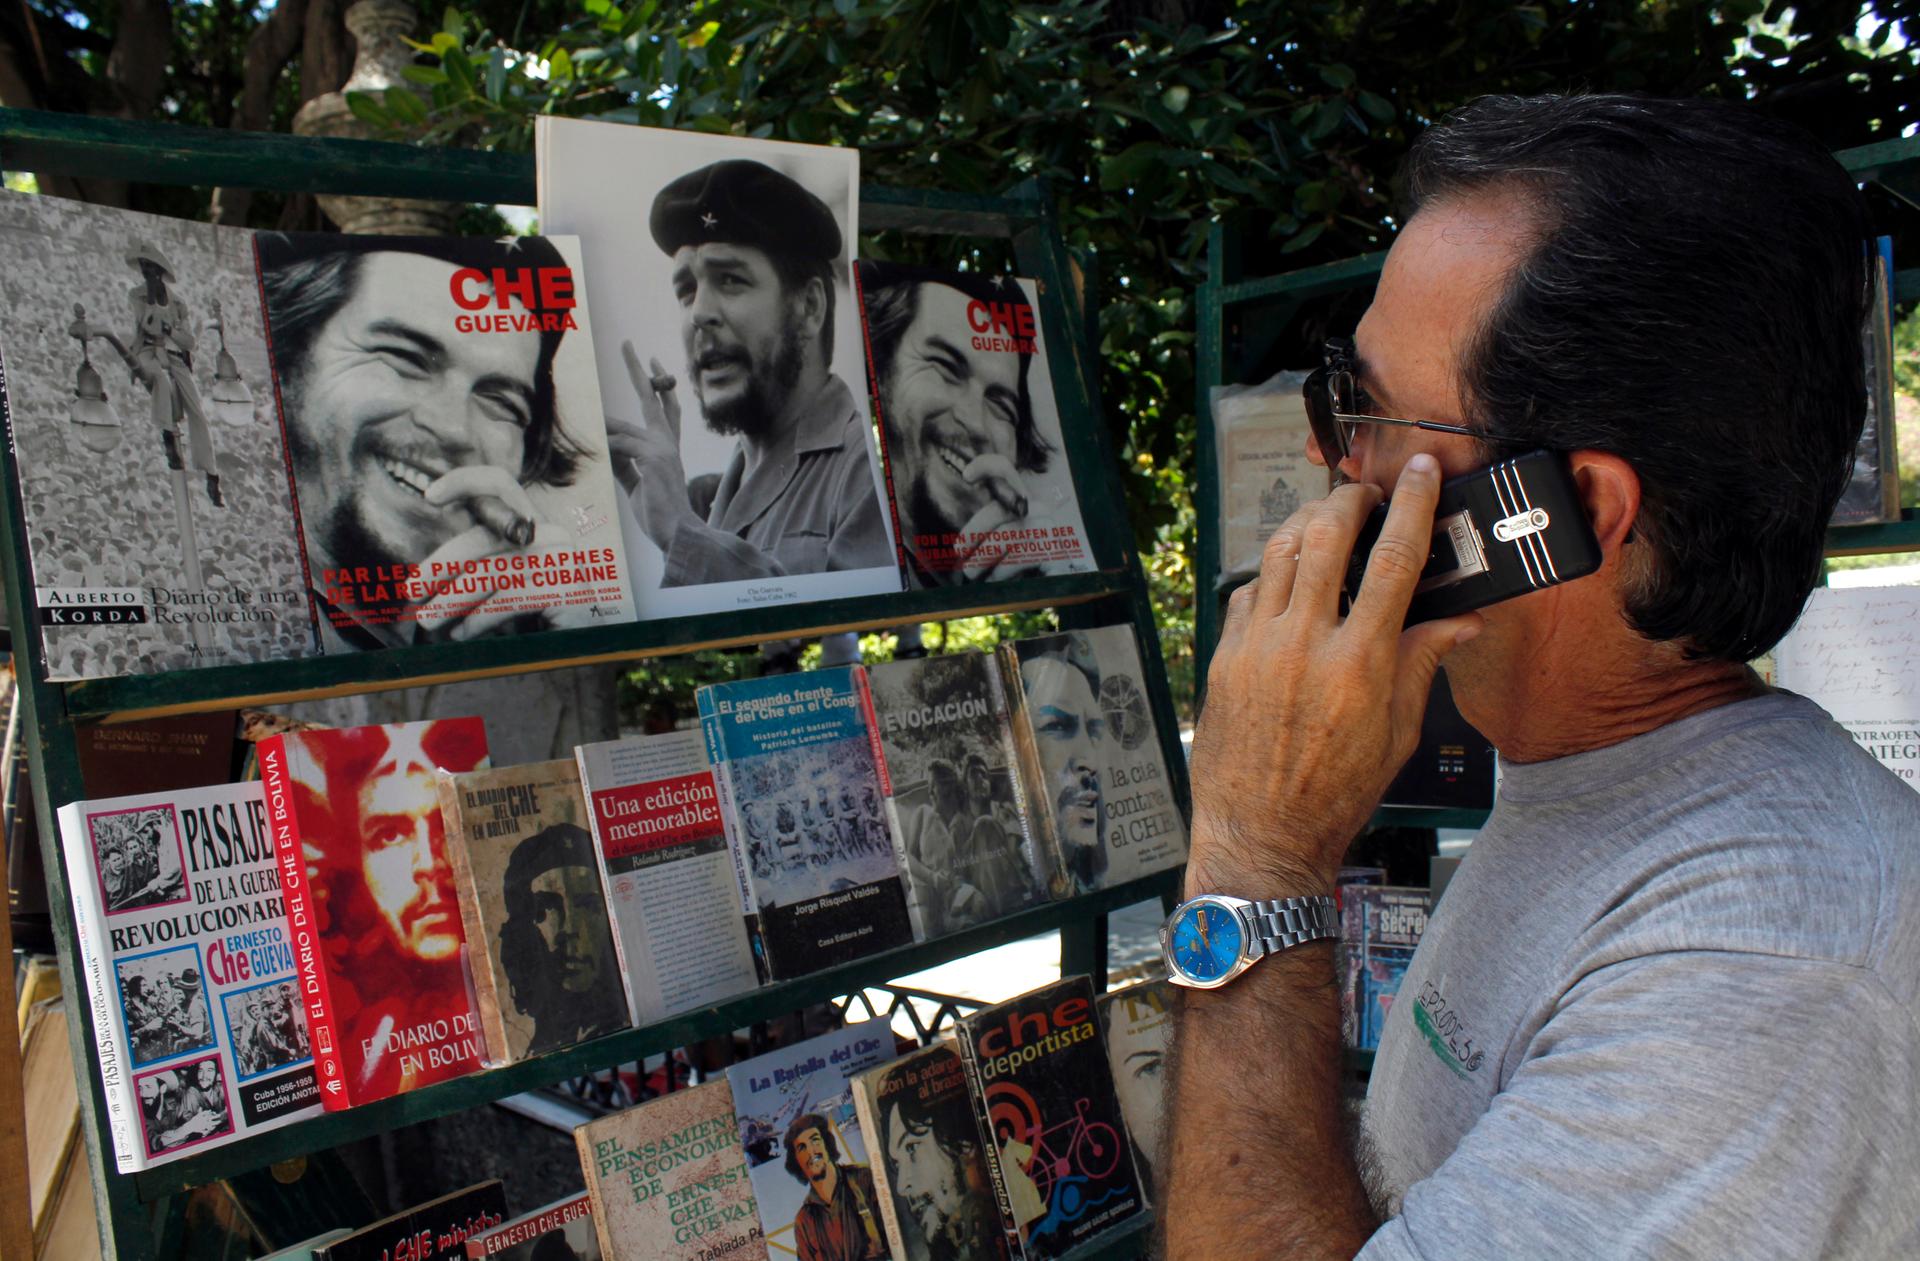 A man speaks on his cell phone on a street in Havana.